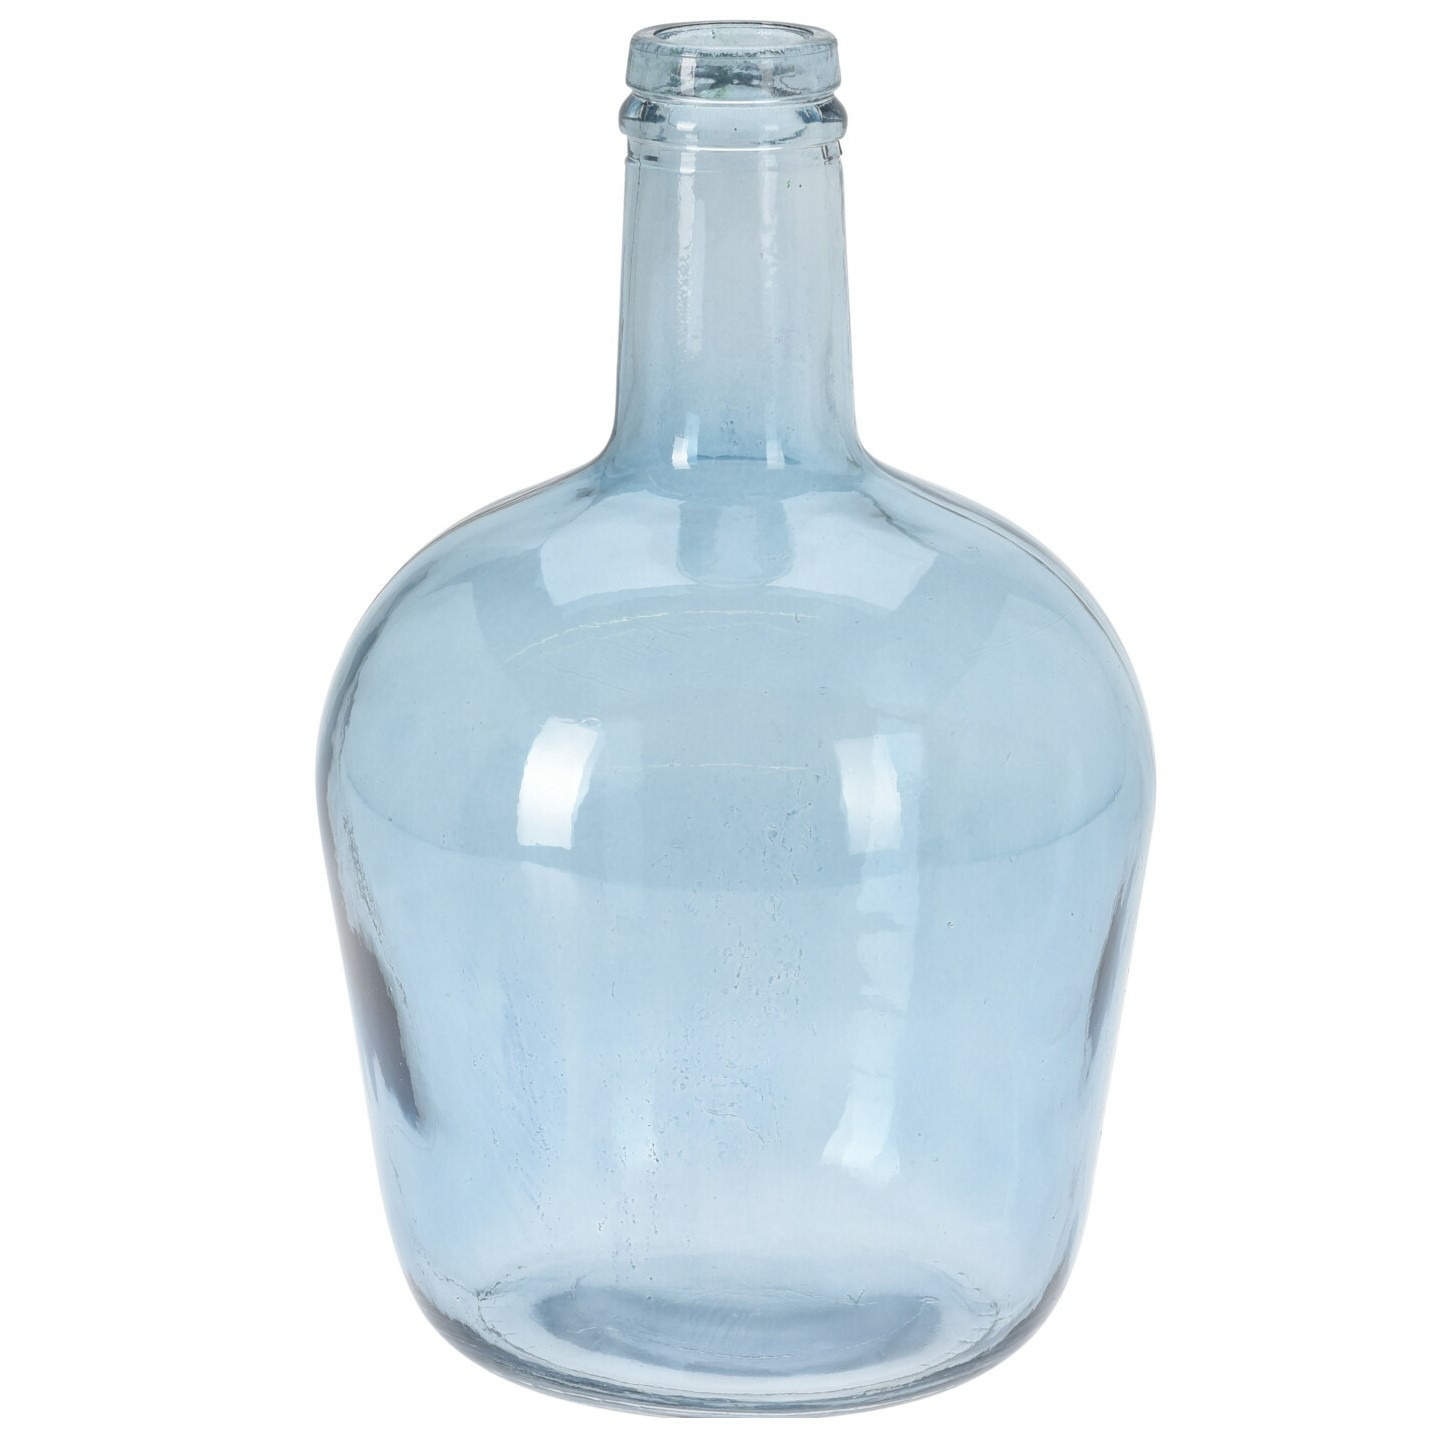 H&S Collection Bloemenvaas San Remo Gerecycled glas blauw transparant D19 x H30 cm